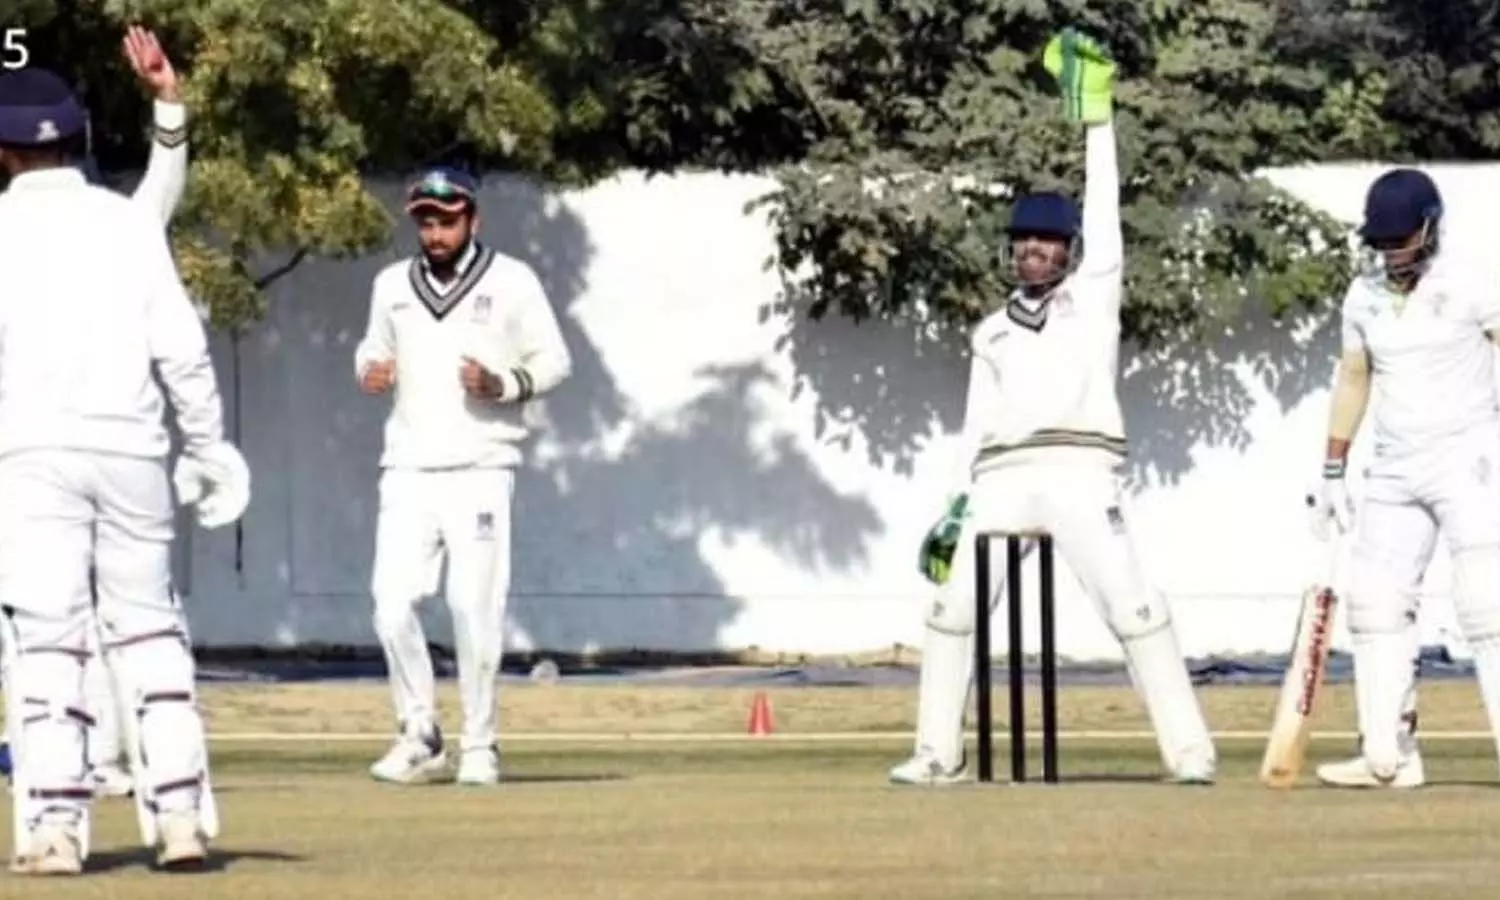 On the second day of the Ranji match, UP scored 257 runs for four wickets till the end of the game against Orissa.